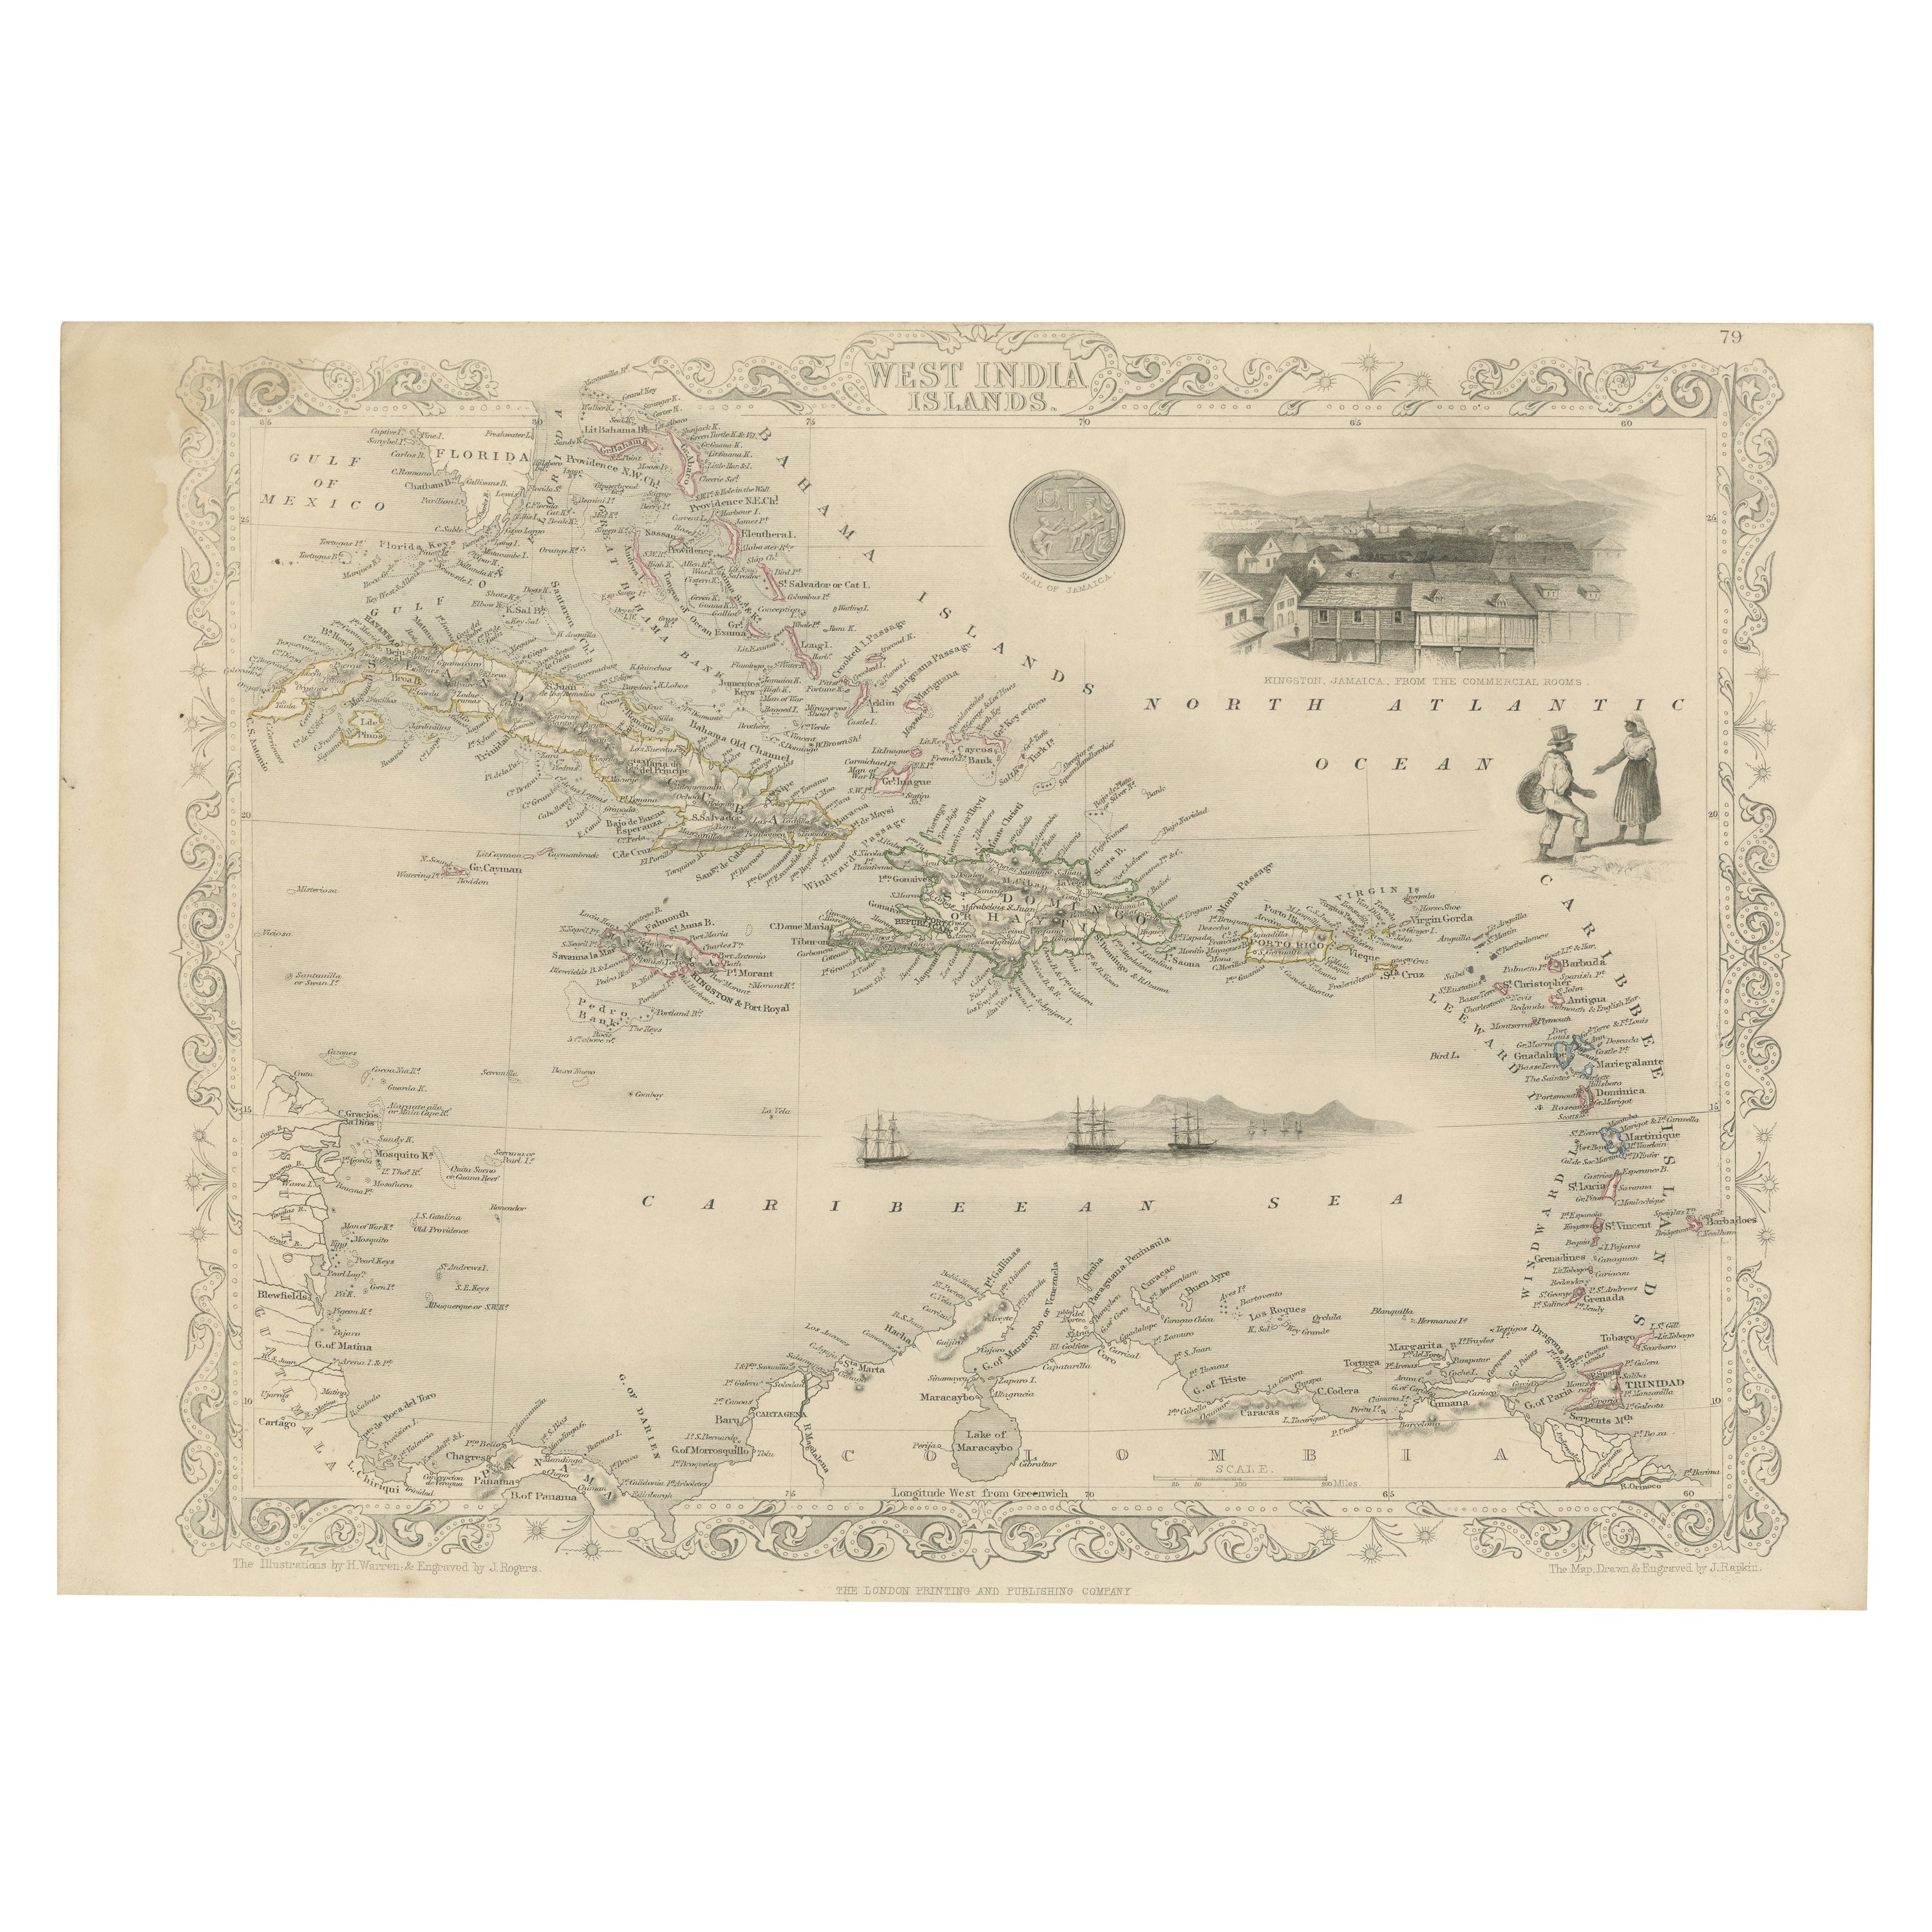  Engraving by Tallis and Rapkin of Map of the West Indies in The Caribbean, 1851